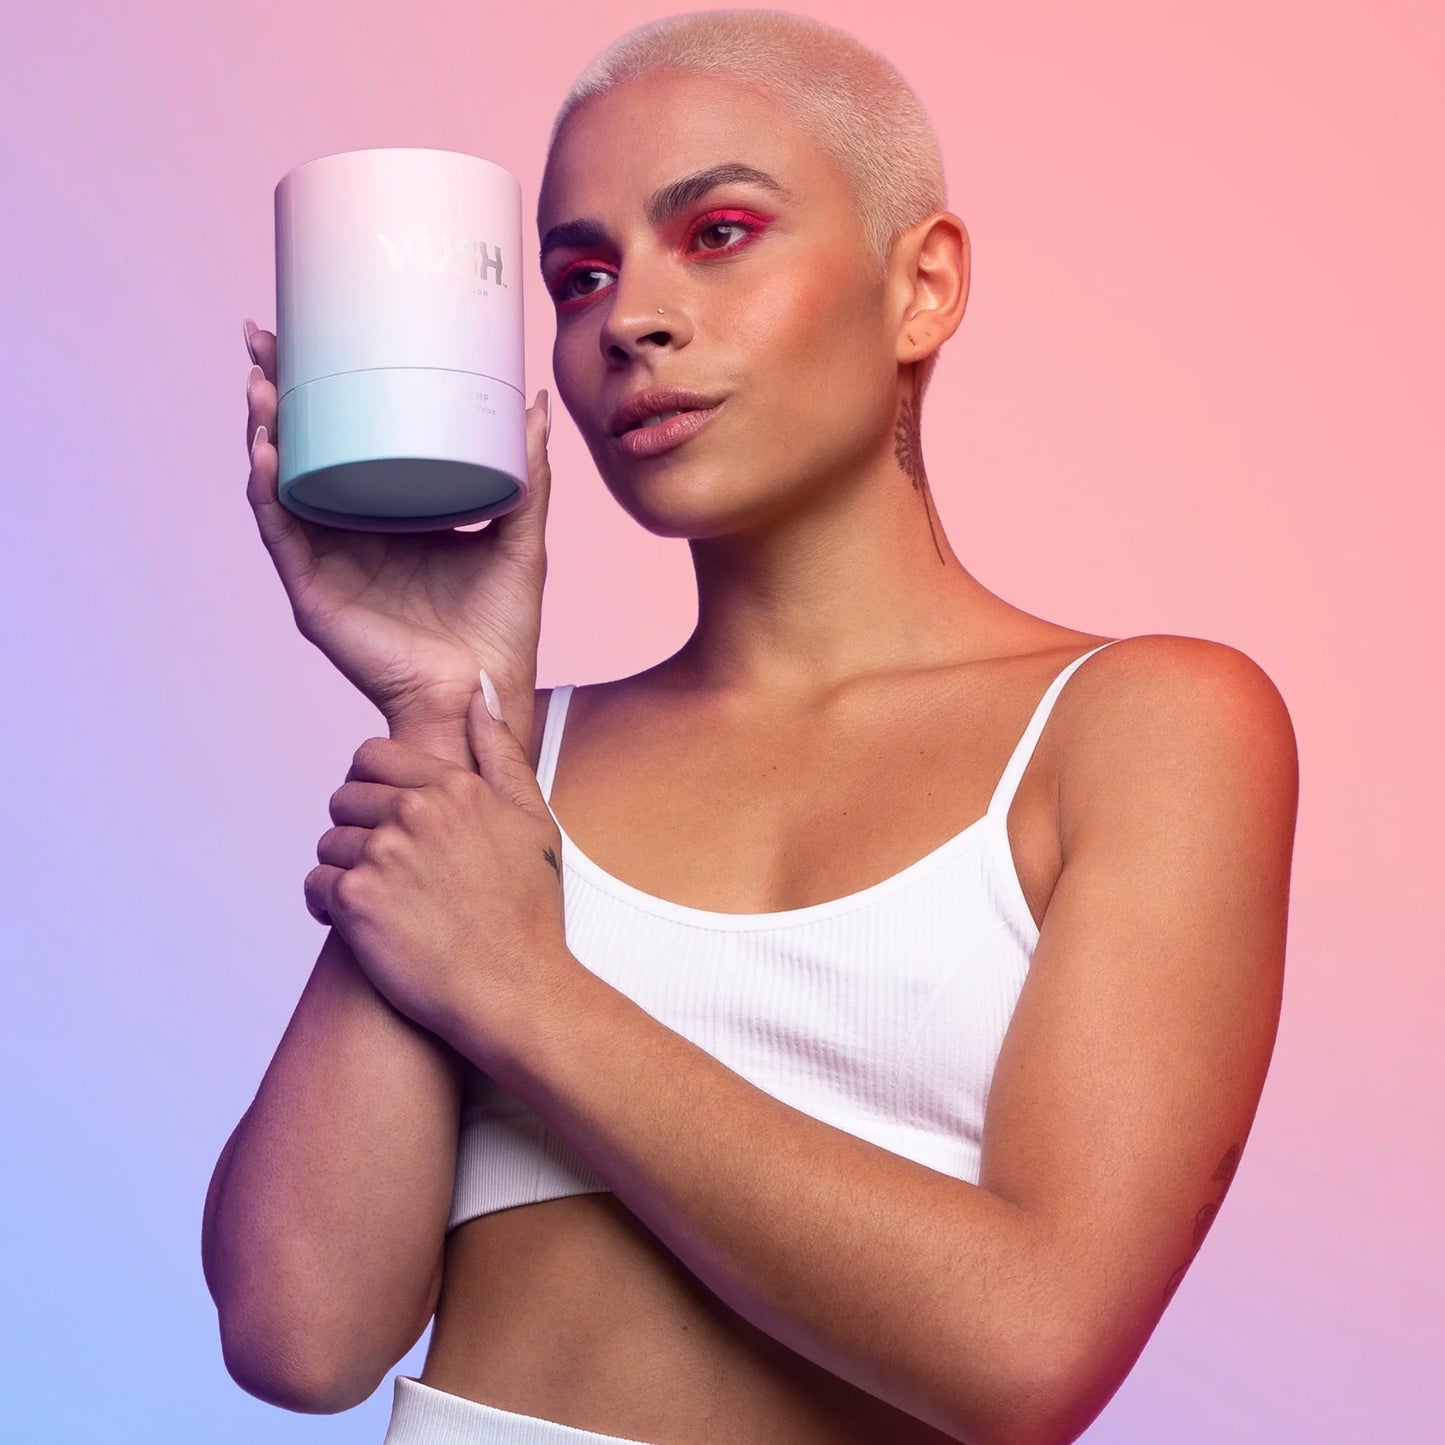 Person with bleached shaved hair wearing white crop top posing with pink/purple/blue cylinder packaging in right hand, holding right arm with left hand.